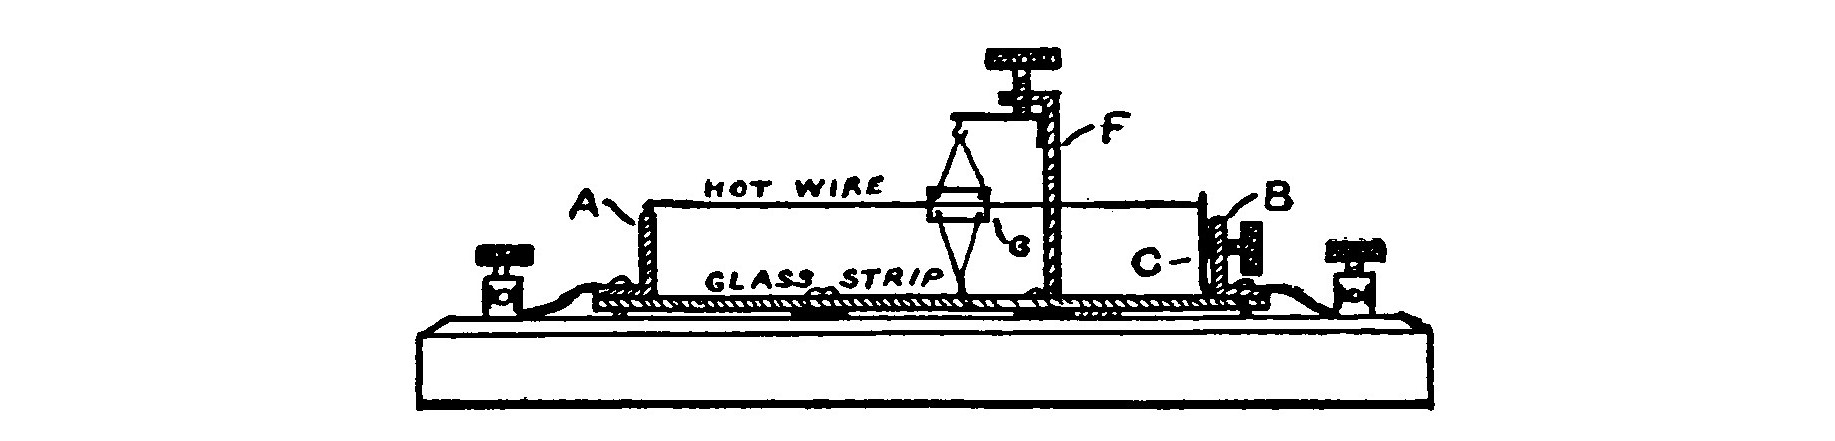 Fig. 86. Side View of Hot Wire and Movement.